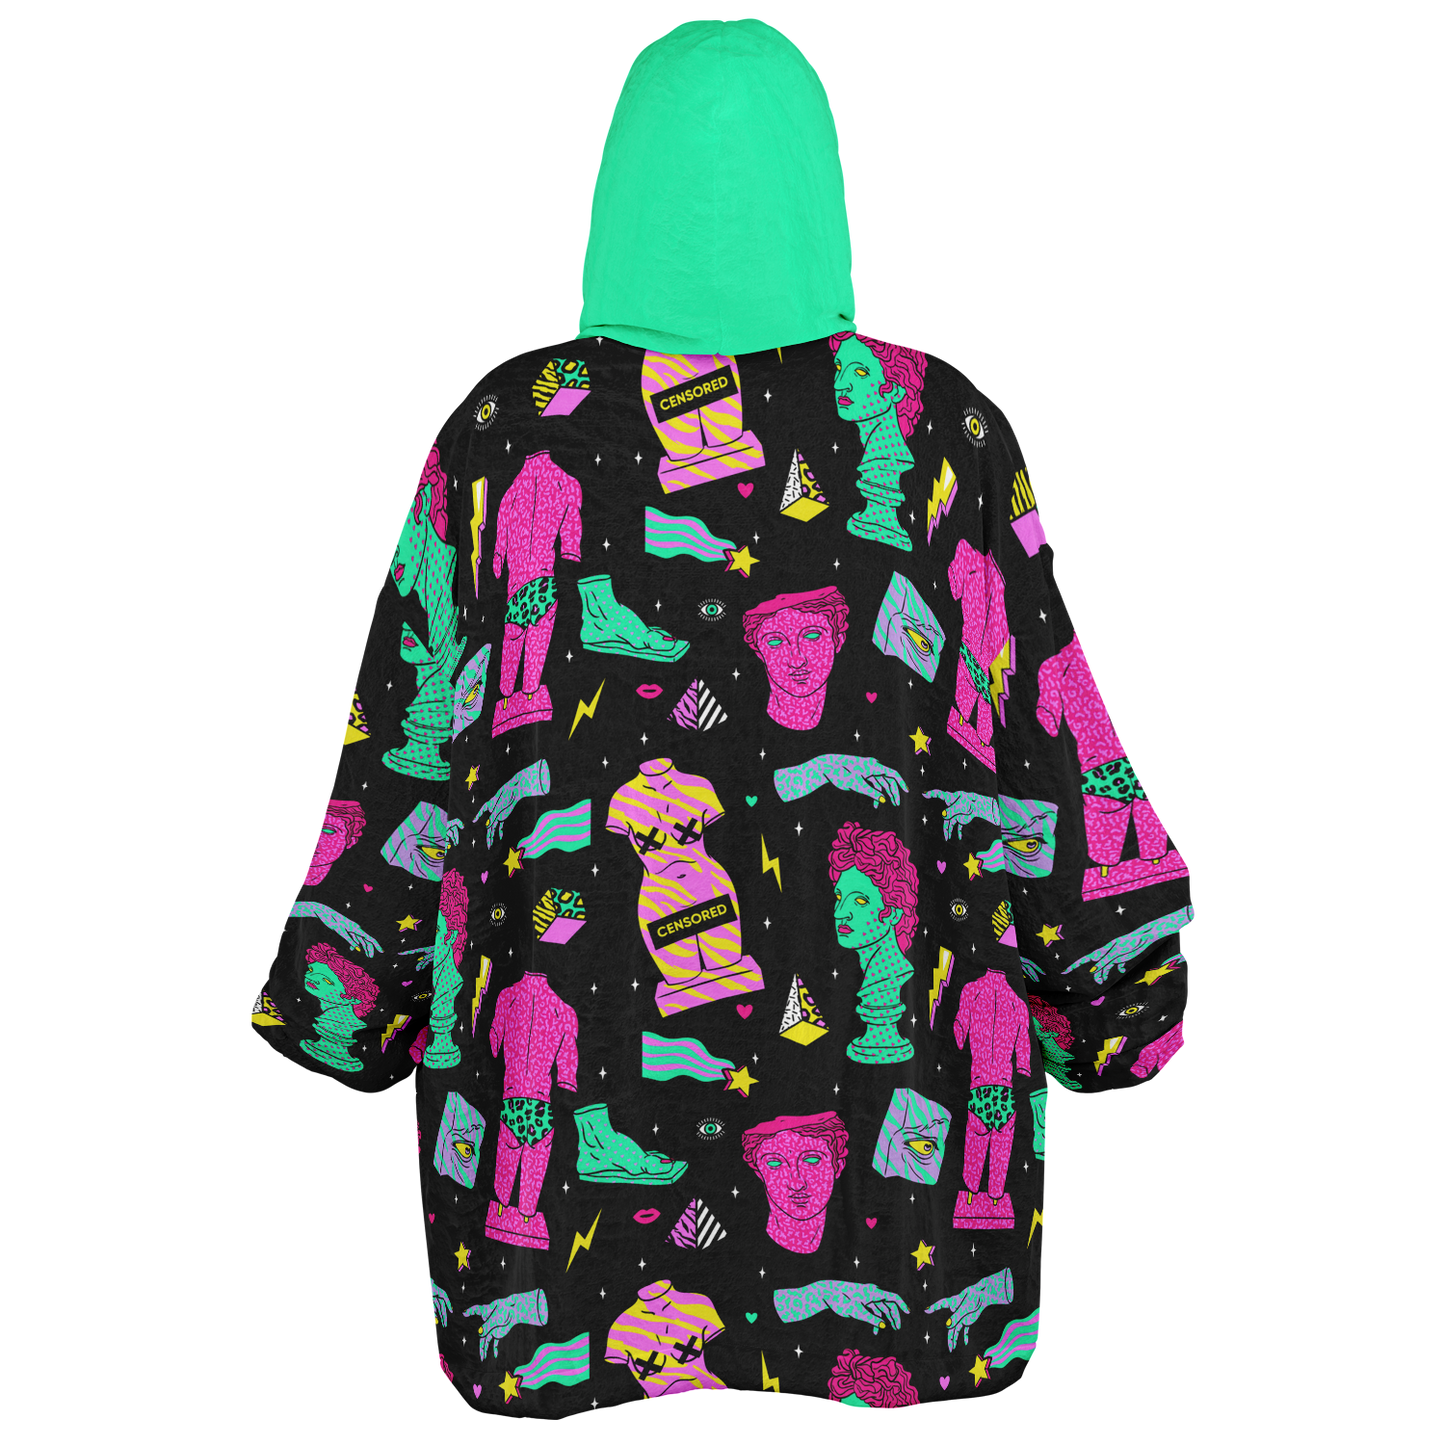 Misbehavin' & Ravin' Super Hoodie - Available for a Strictly Limited Time - Buy 2 & Get FREE Shipping